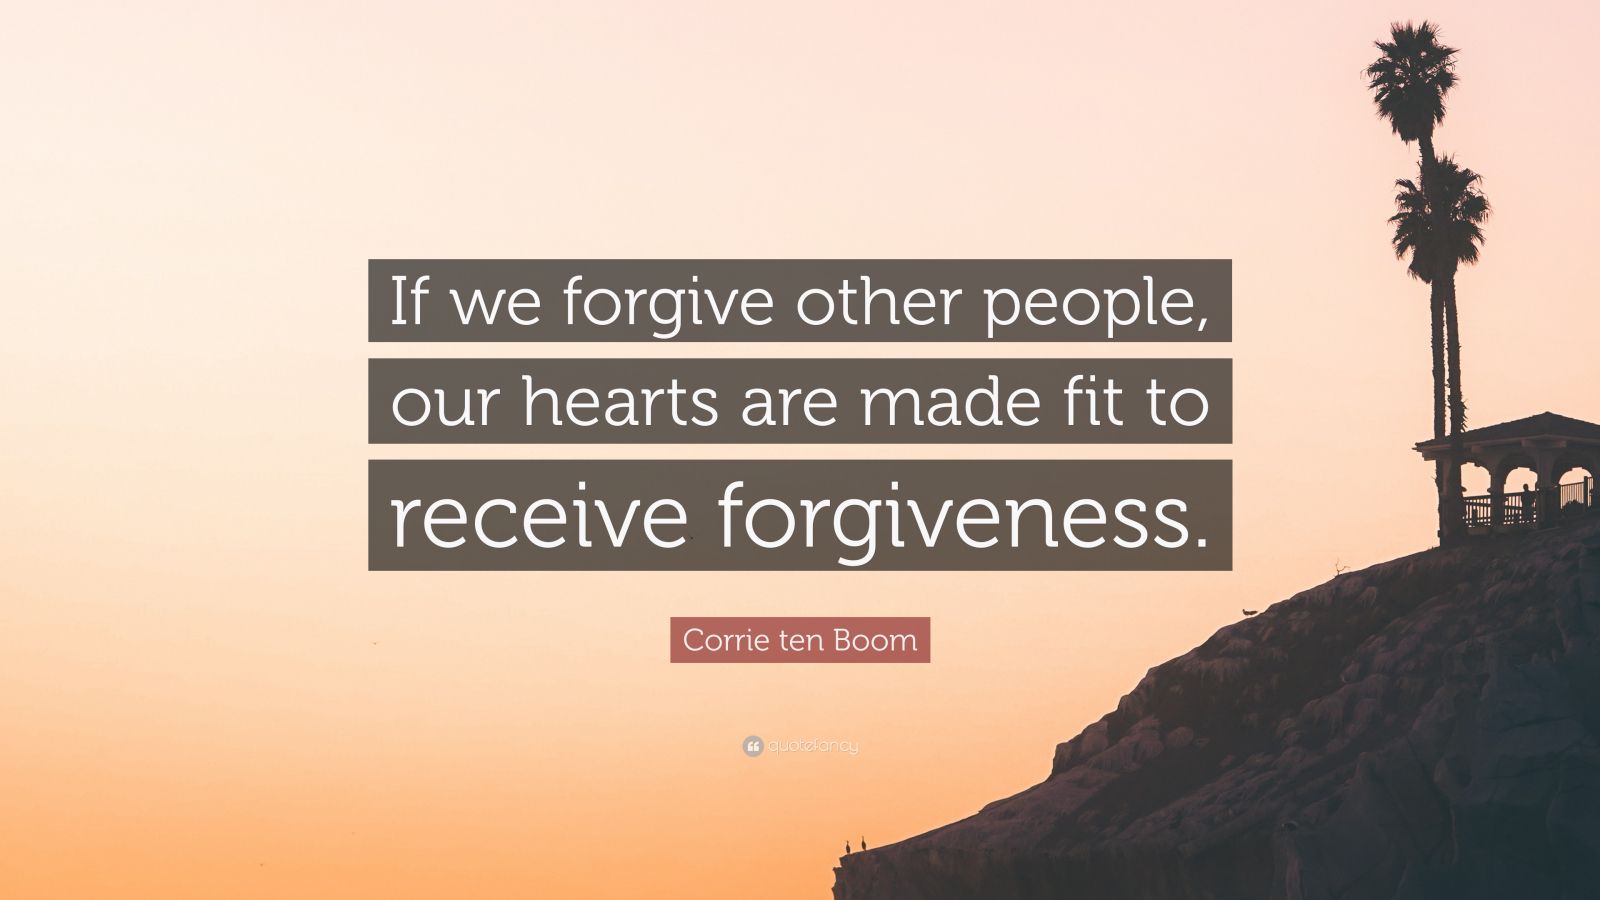 corrie ten boom quotes on forgiveness